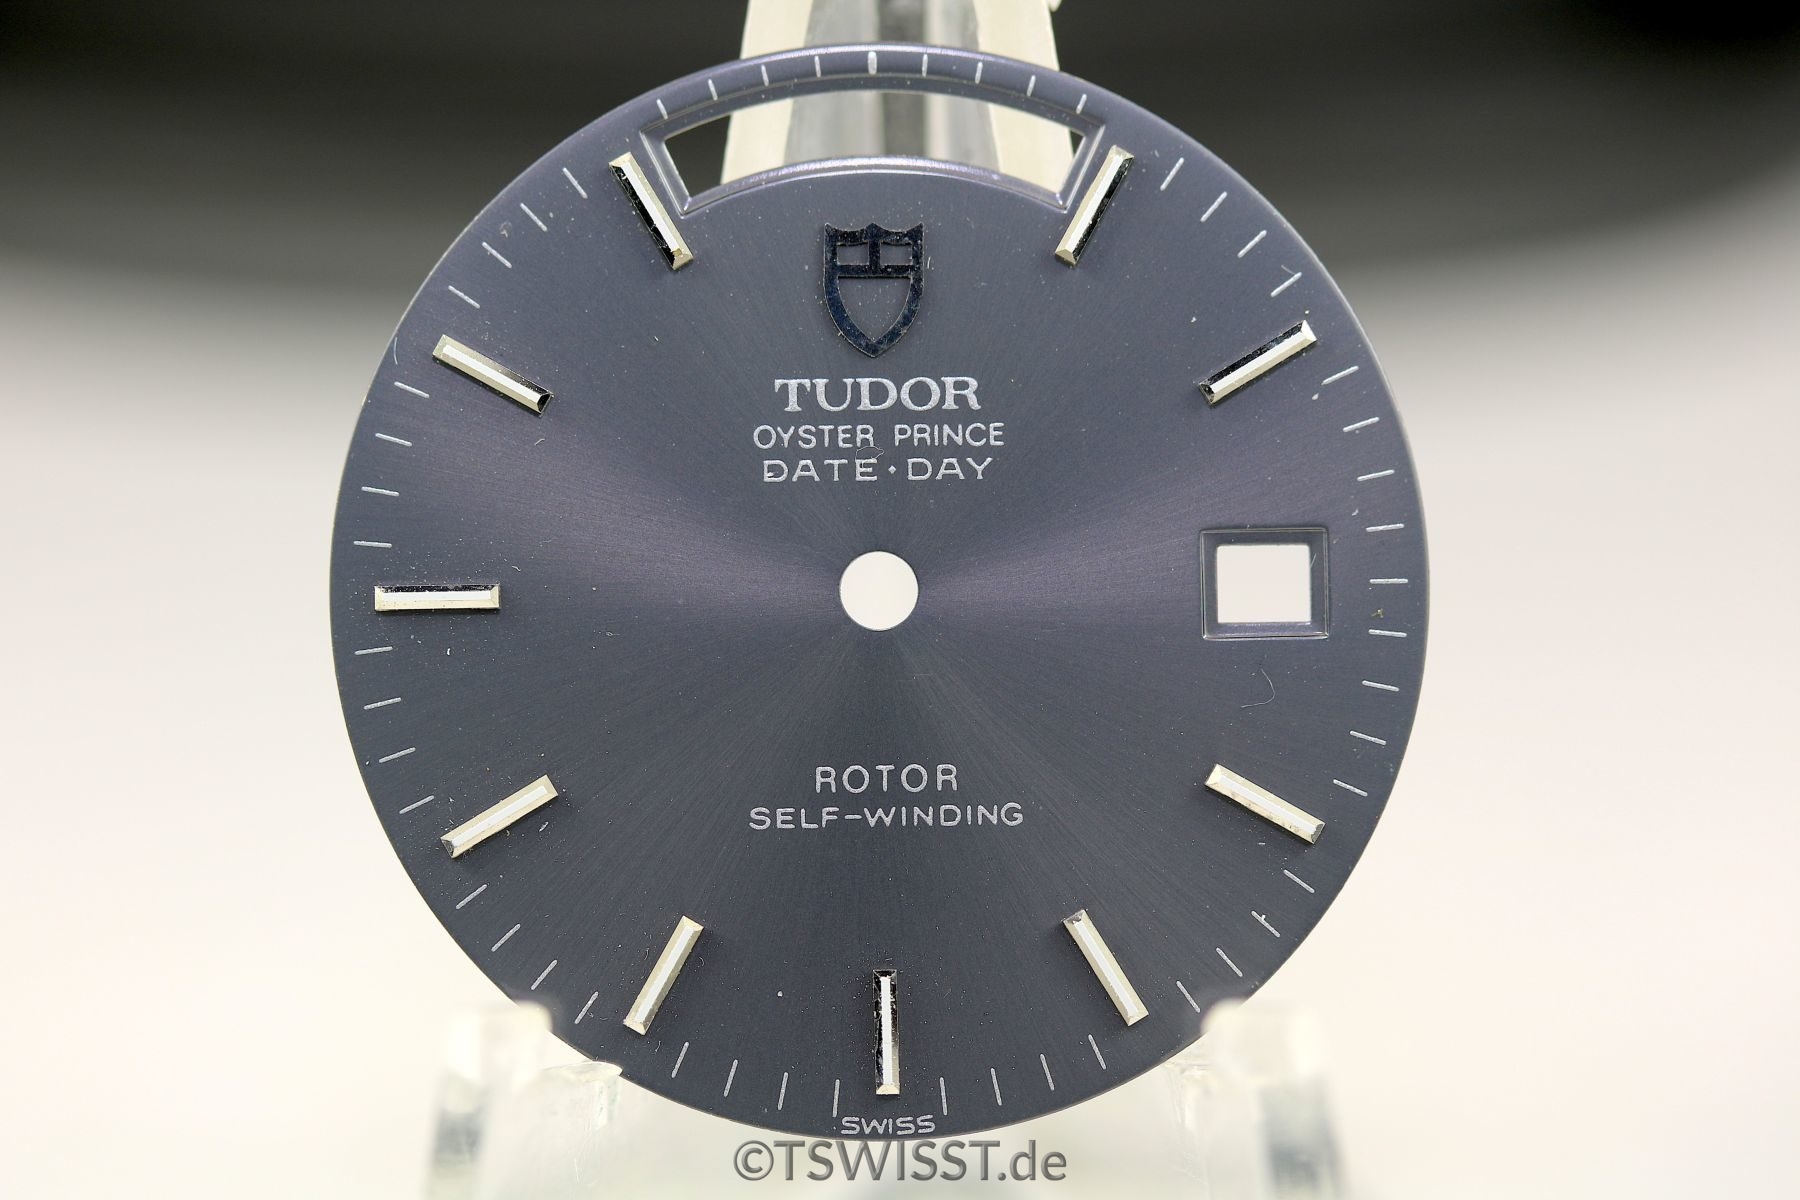 Tudor Date-day dial